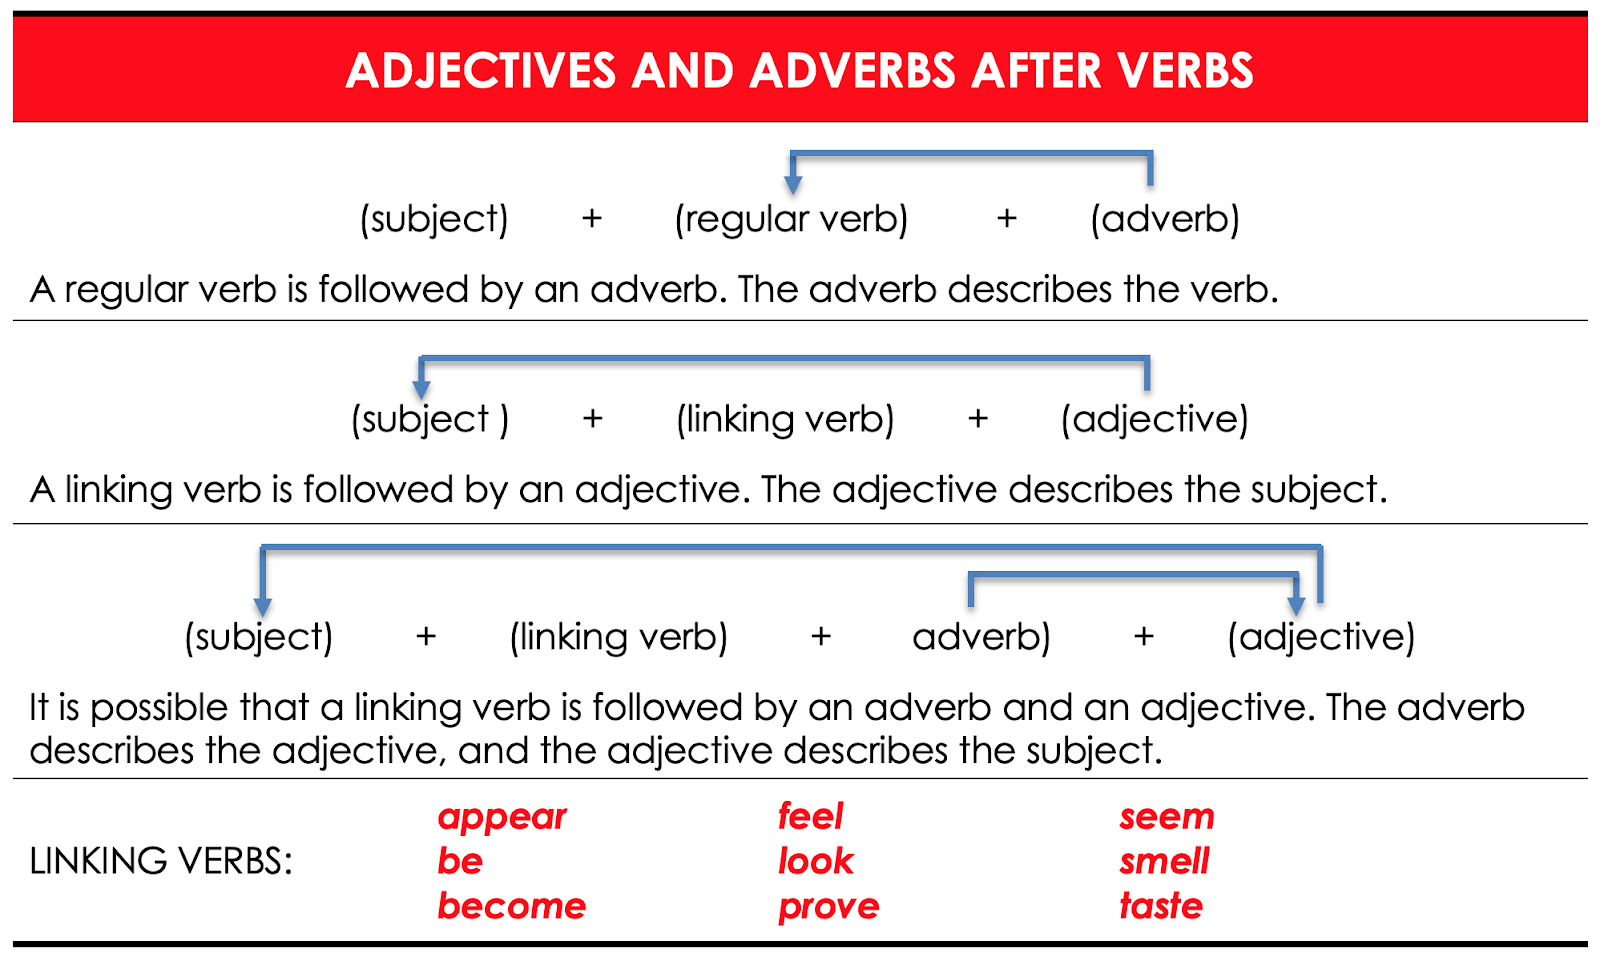 Use adjectives and adverbs. Link verbs в английском. Adjectives from verbs правило. Linking verbs в английском. Правило verb adverbs adjectives.